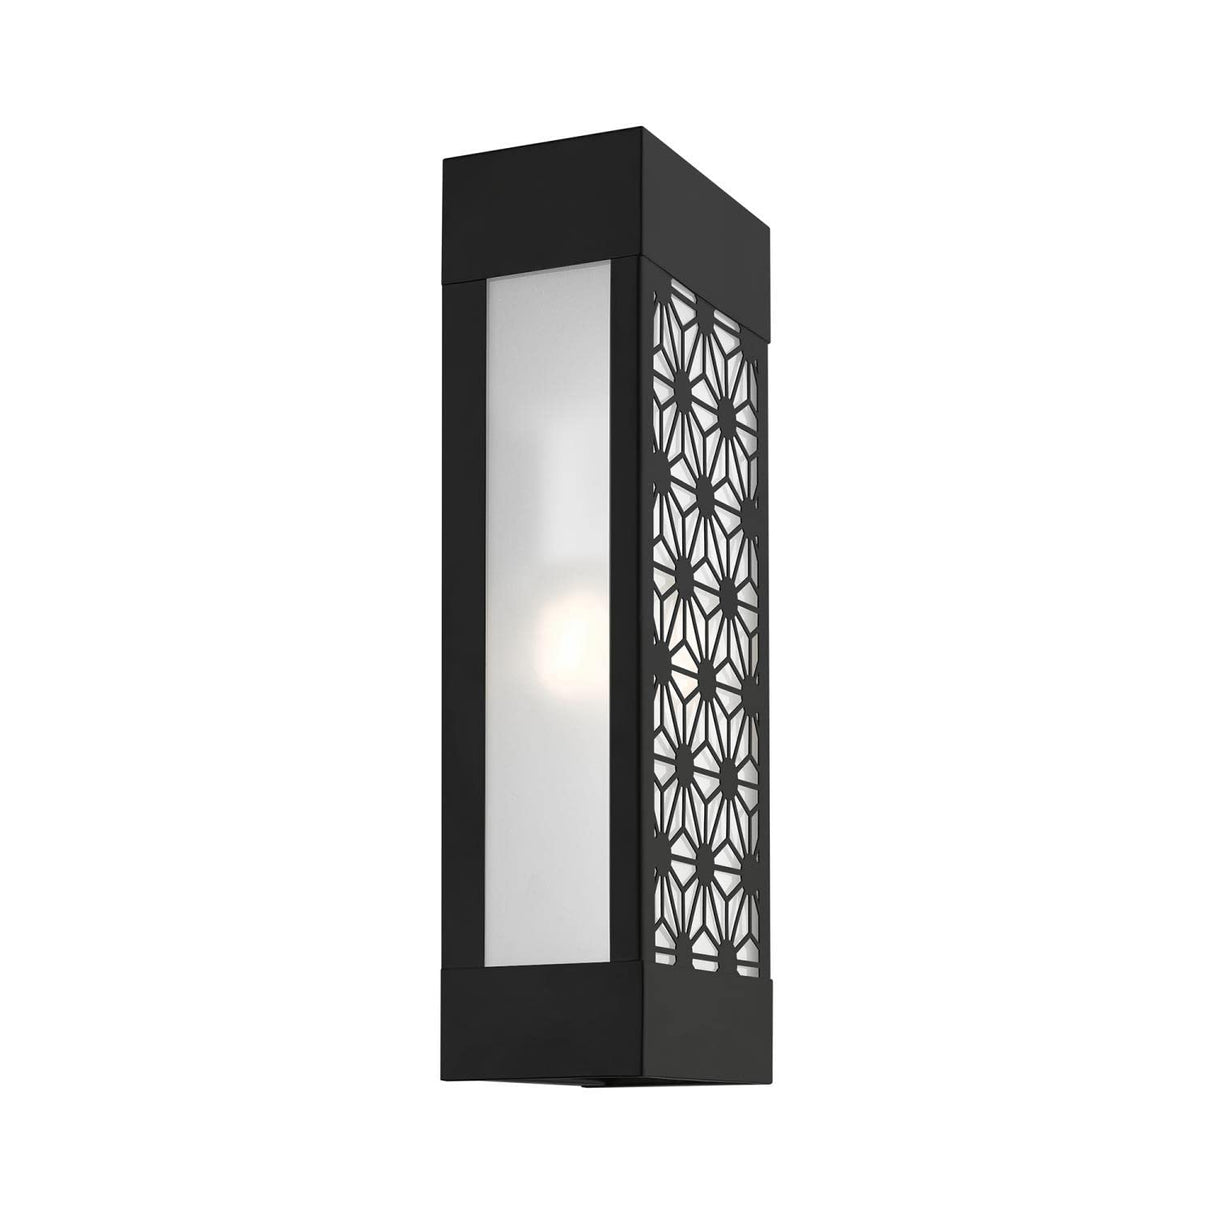 Livex Lighting 24322-04 Berkeley - 2 Light Outdoor ADA Wall Sconce in Nordic Style-17 Inches Tall and 6 Inches Wide, Finish Color: Black